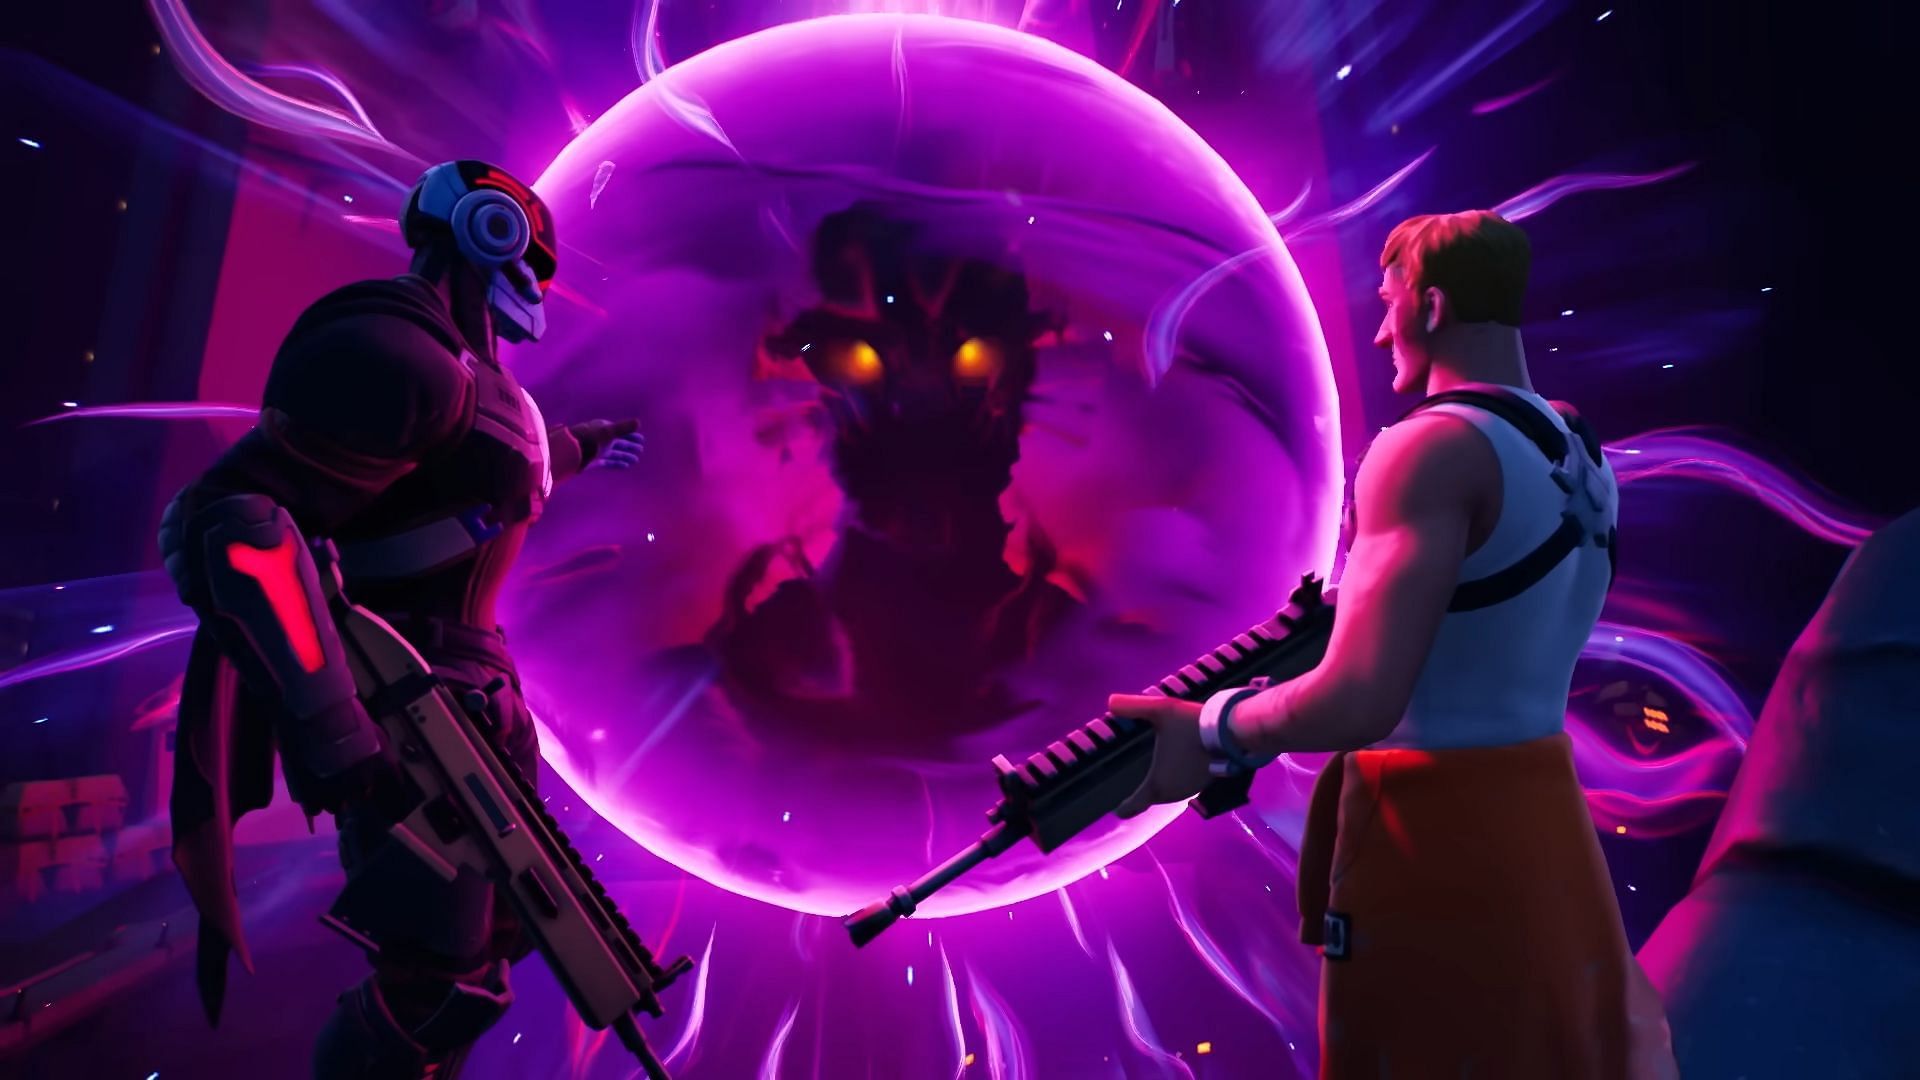 Geno will likely not play a role in Fortnite Chapter 4 (Image via Fortnite/Youtube)